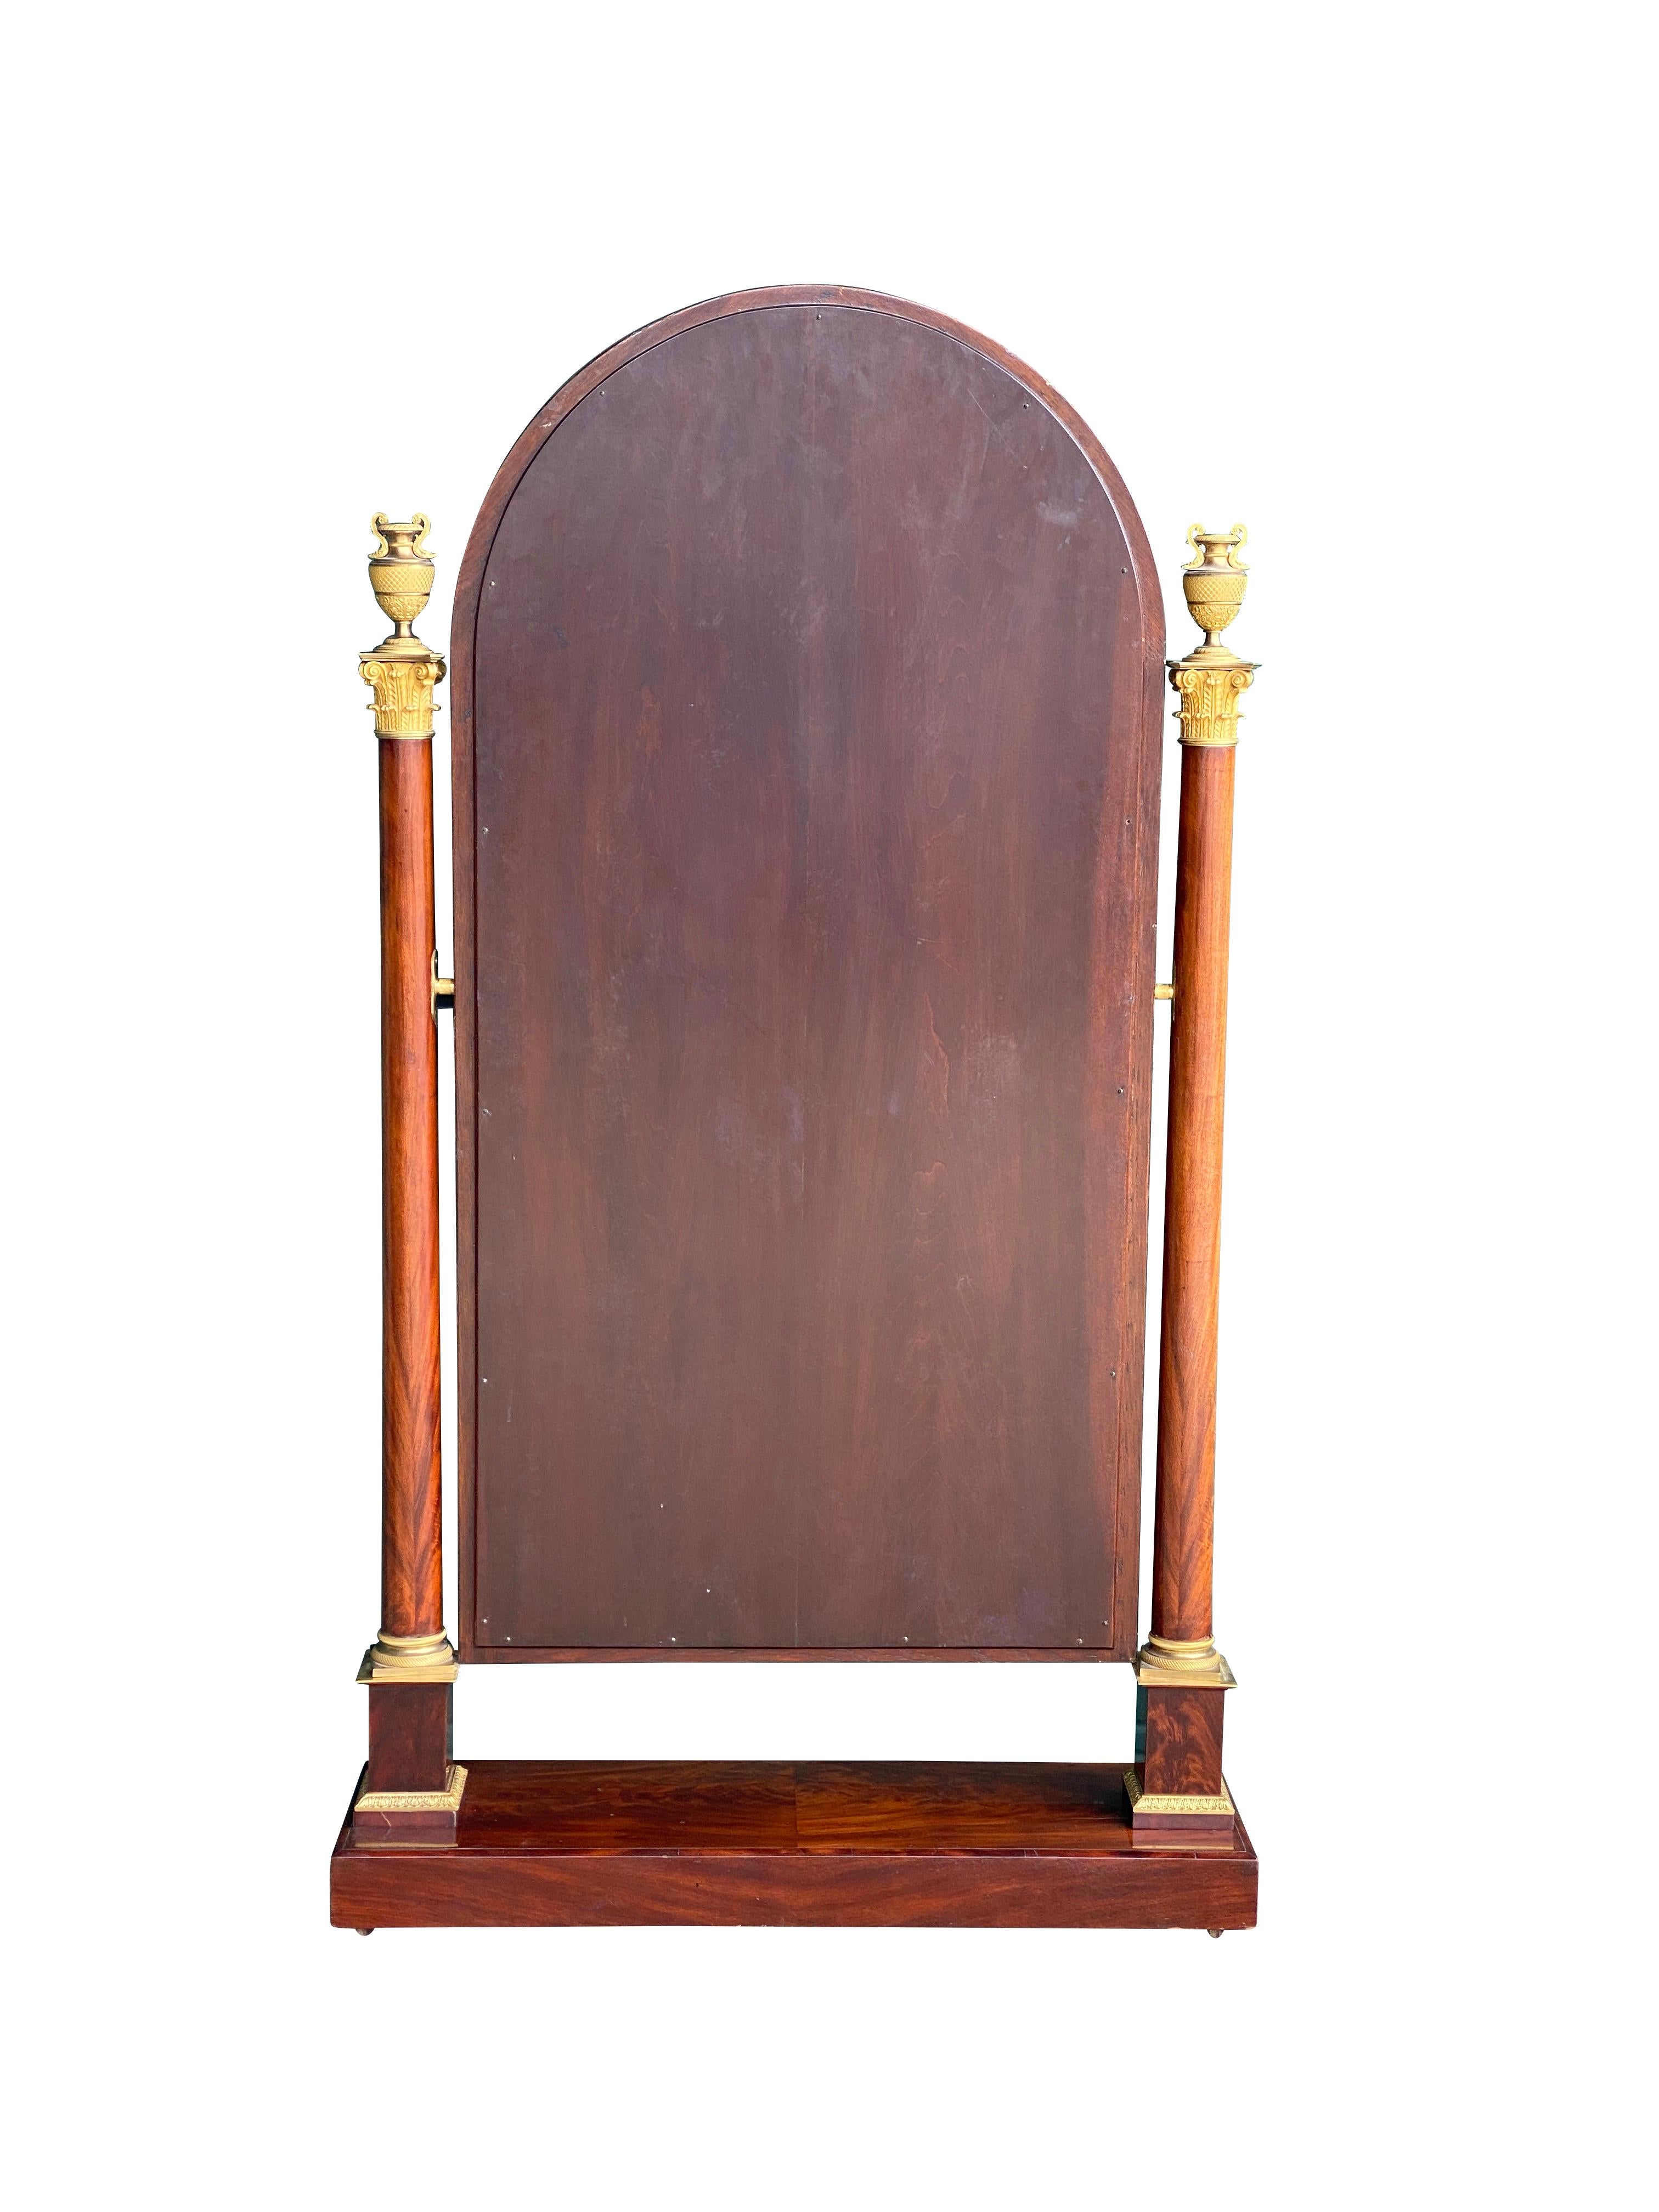 Early 19th Century French Empire Mahogany and Ormolu Mounted Cheval Mirror For Sale